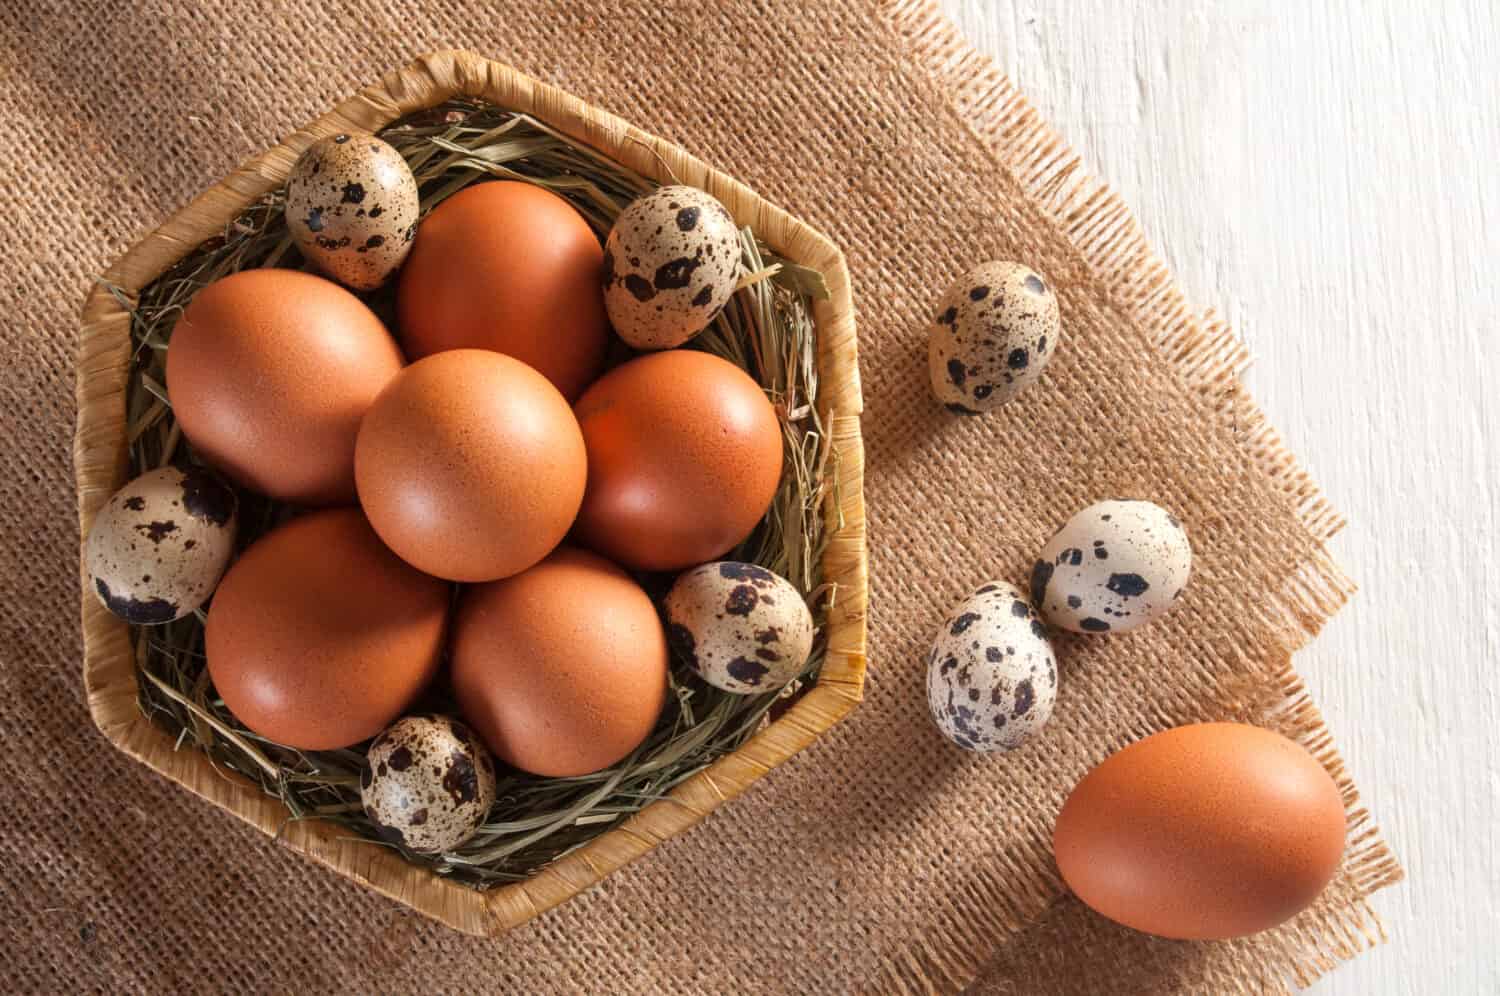 Some brown chicken eggs and several small motley quail eggs on straw in wicker basket and three quail eggs and one chicken egg on sackcloth. All this on white wooden table.